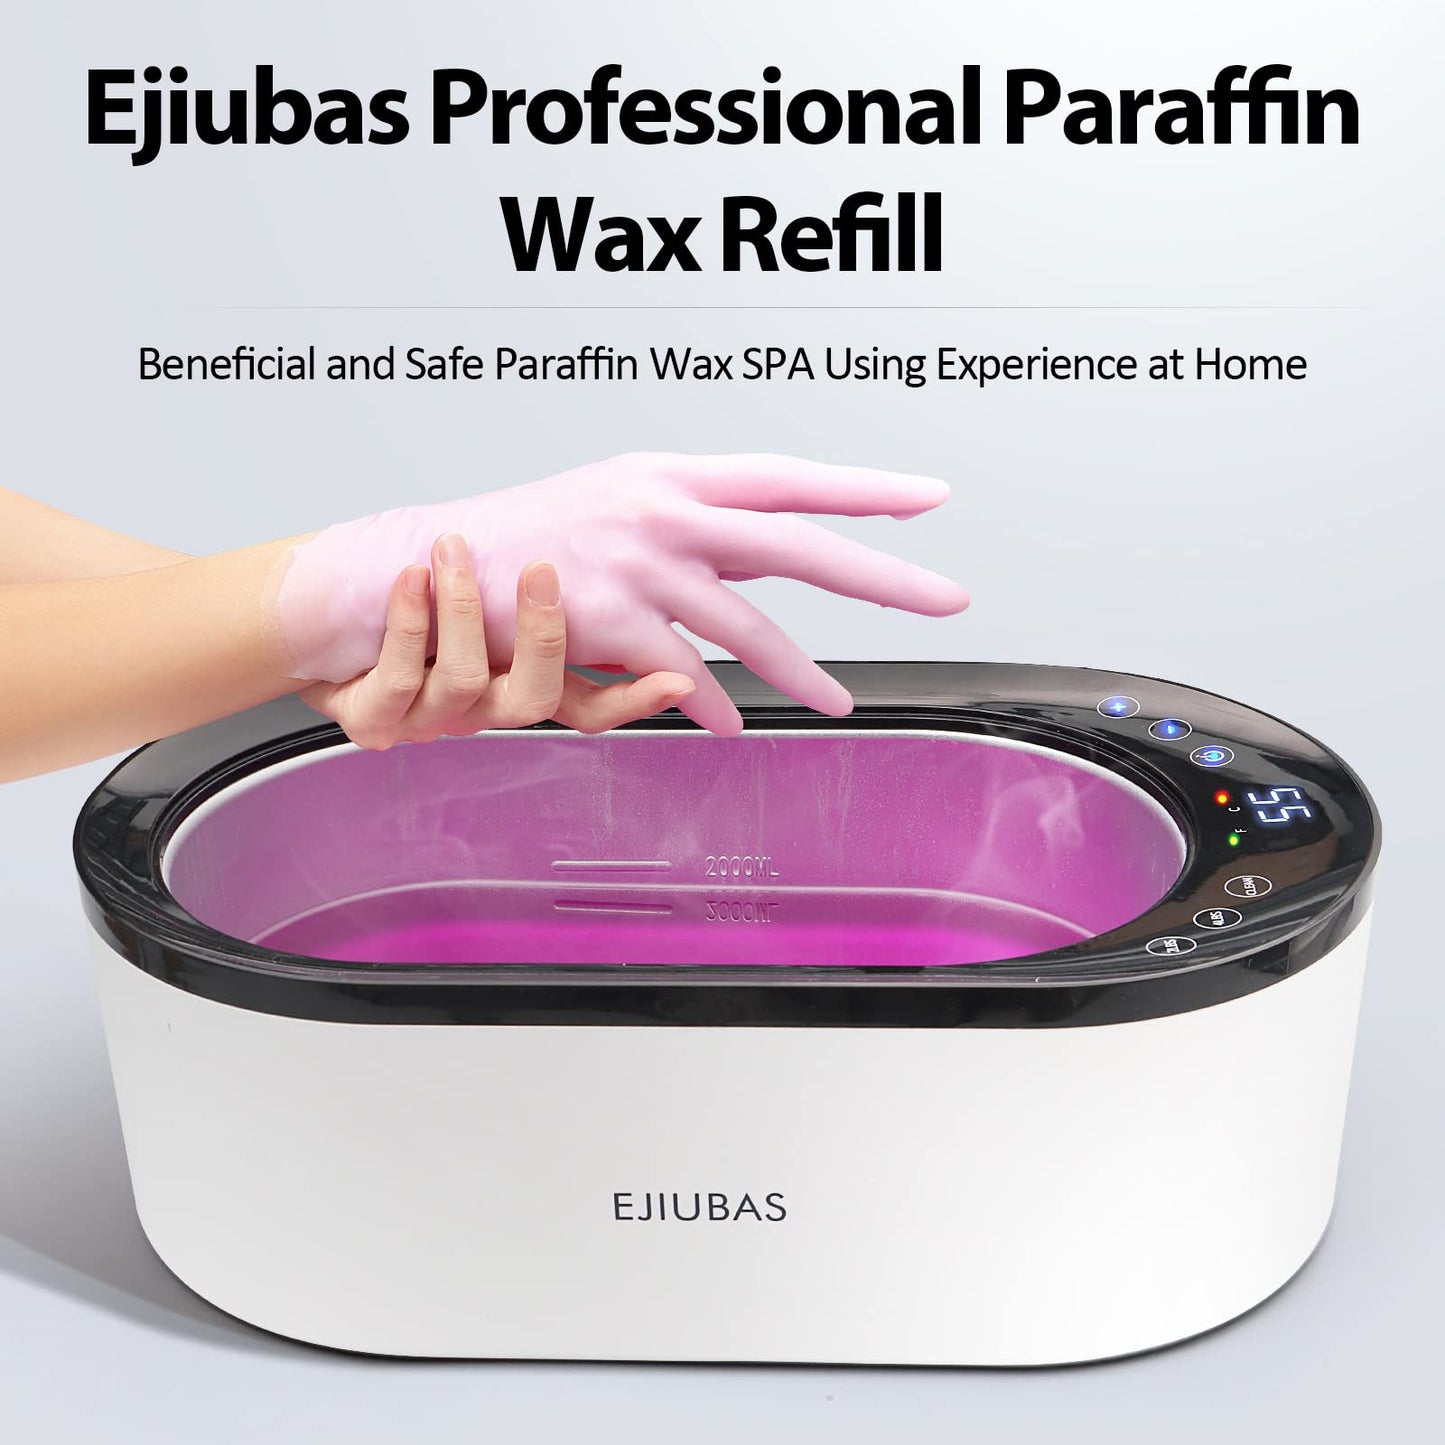 Paraffin Wax Refills 4 lbs - Ejiubas Lavender Paraffin Wax Blocks for Paraffin Bath Machine,Paraffin Wax for Hand and Feet, Relieve Arthitis Pain and Stiff Muscles Deep Hydration Family Christmas Gift